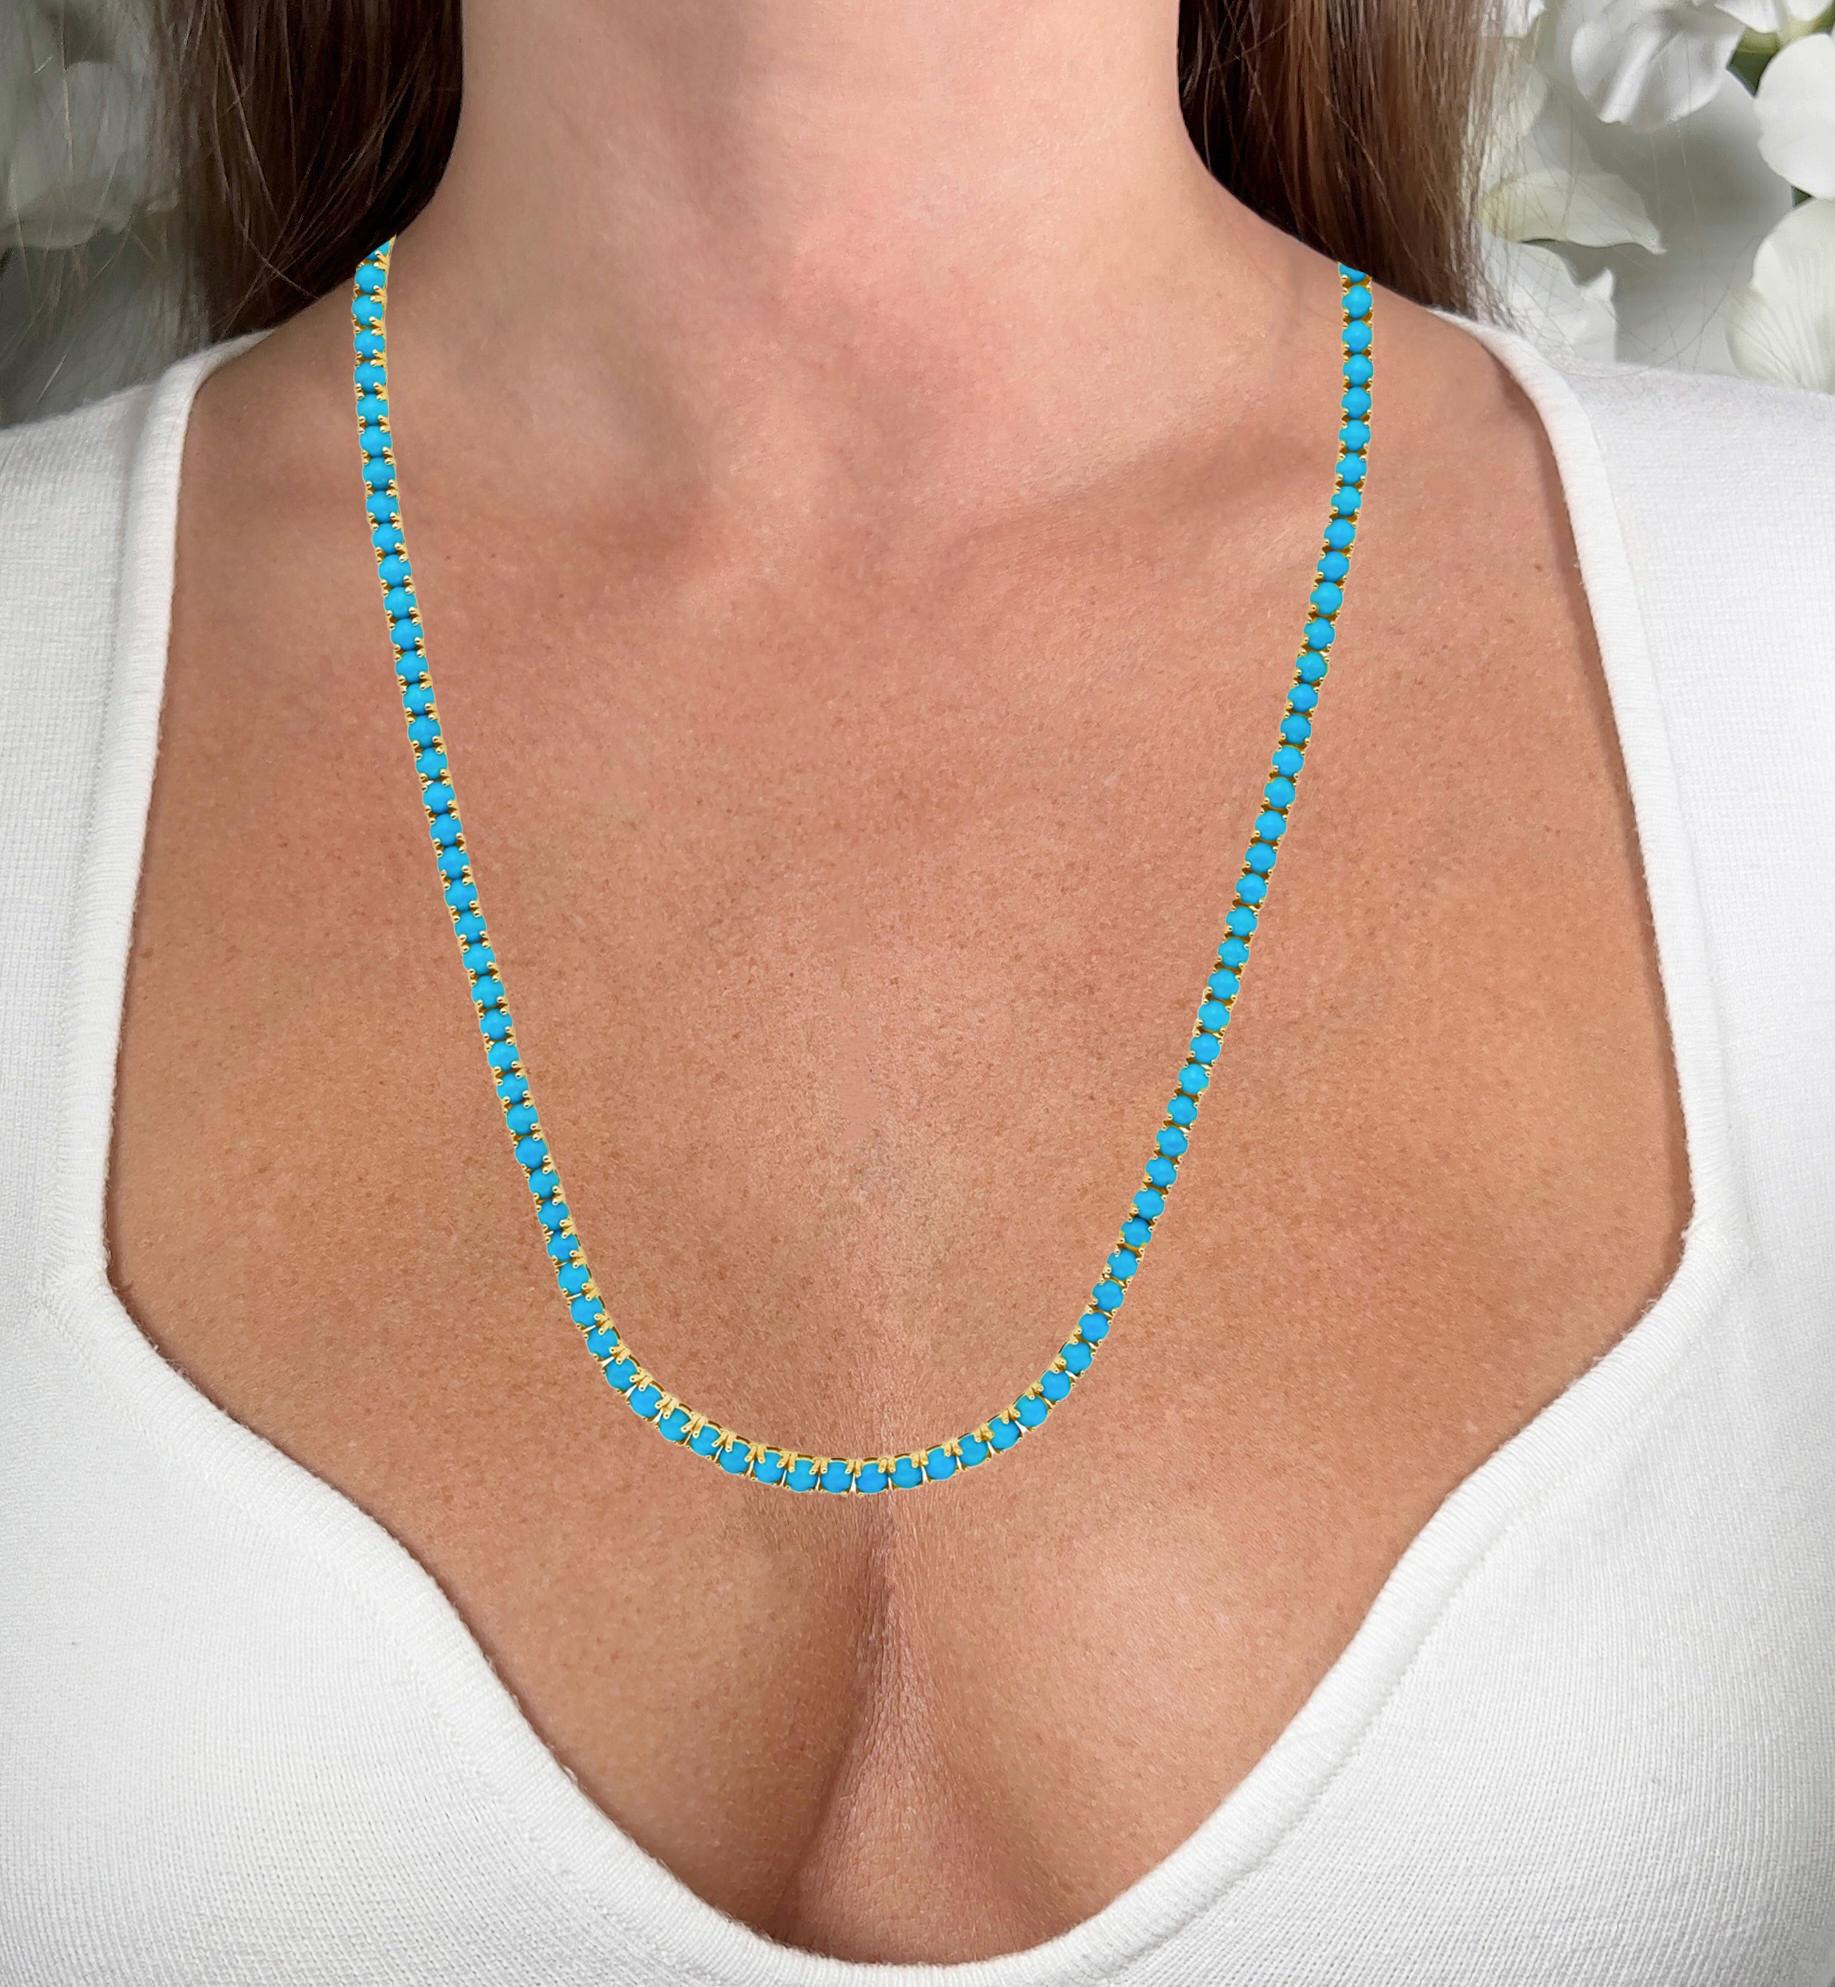 It comes with the Gemological Appraisal by GIA GG/AJP
All Gemstones are Natural
Turquoise = 16.90 Carats
Total Quantity: 121 Gemstones
Metal: 14K Yellow Gold
Necklace Length: 18 Inches